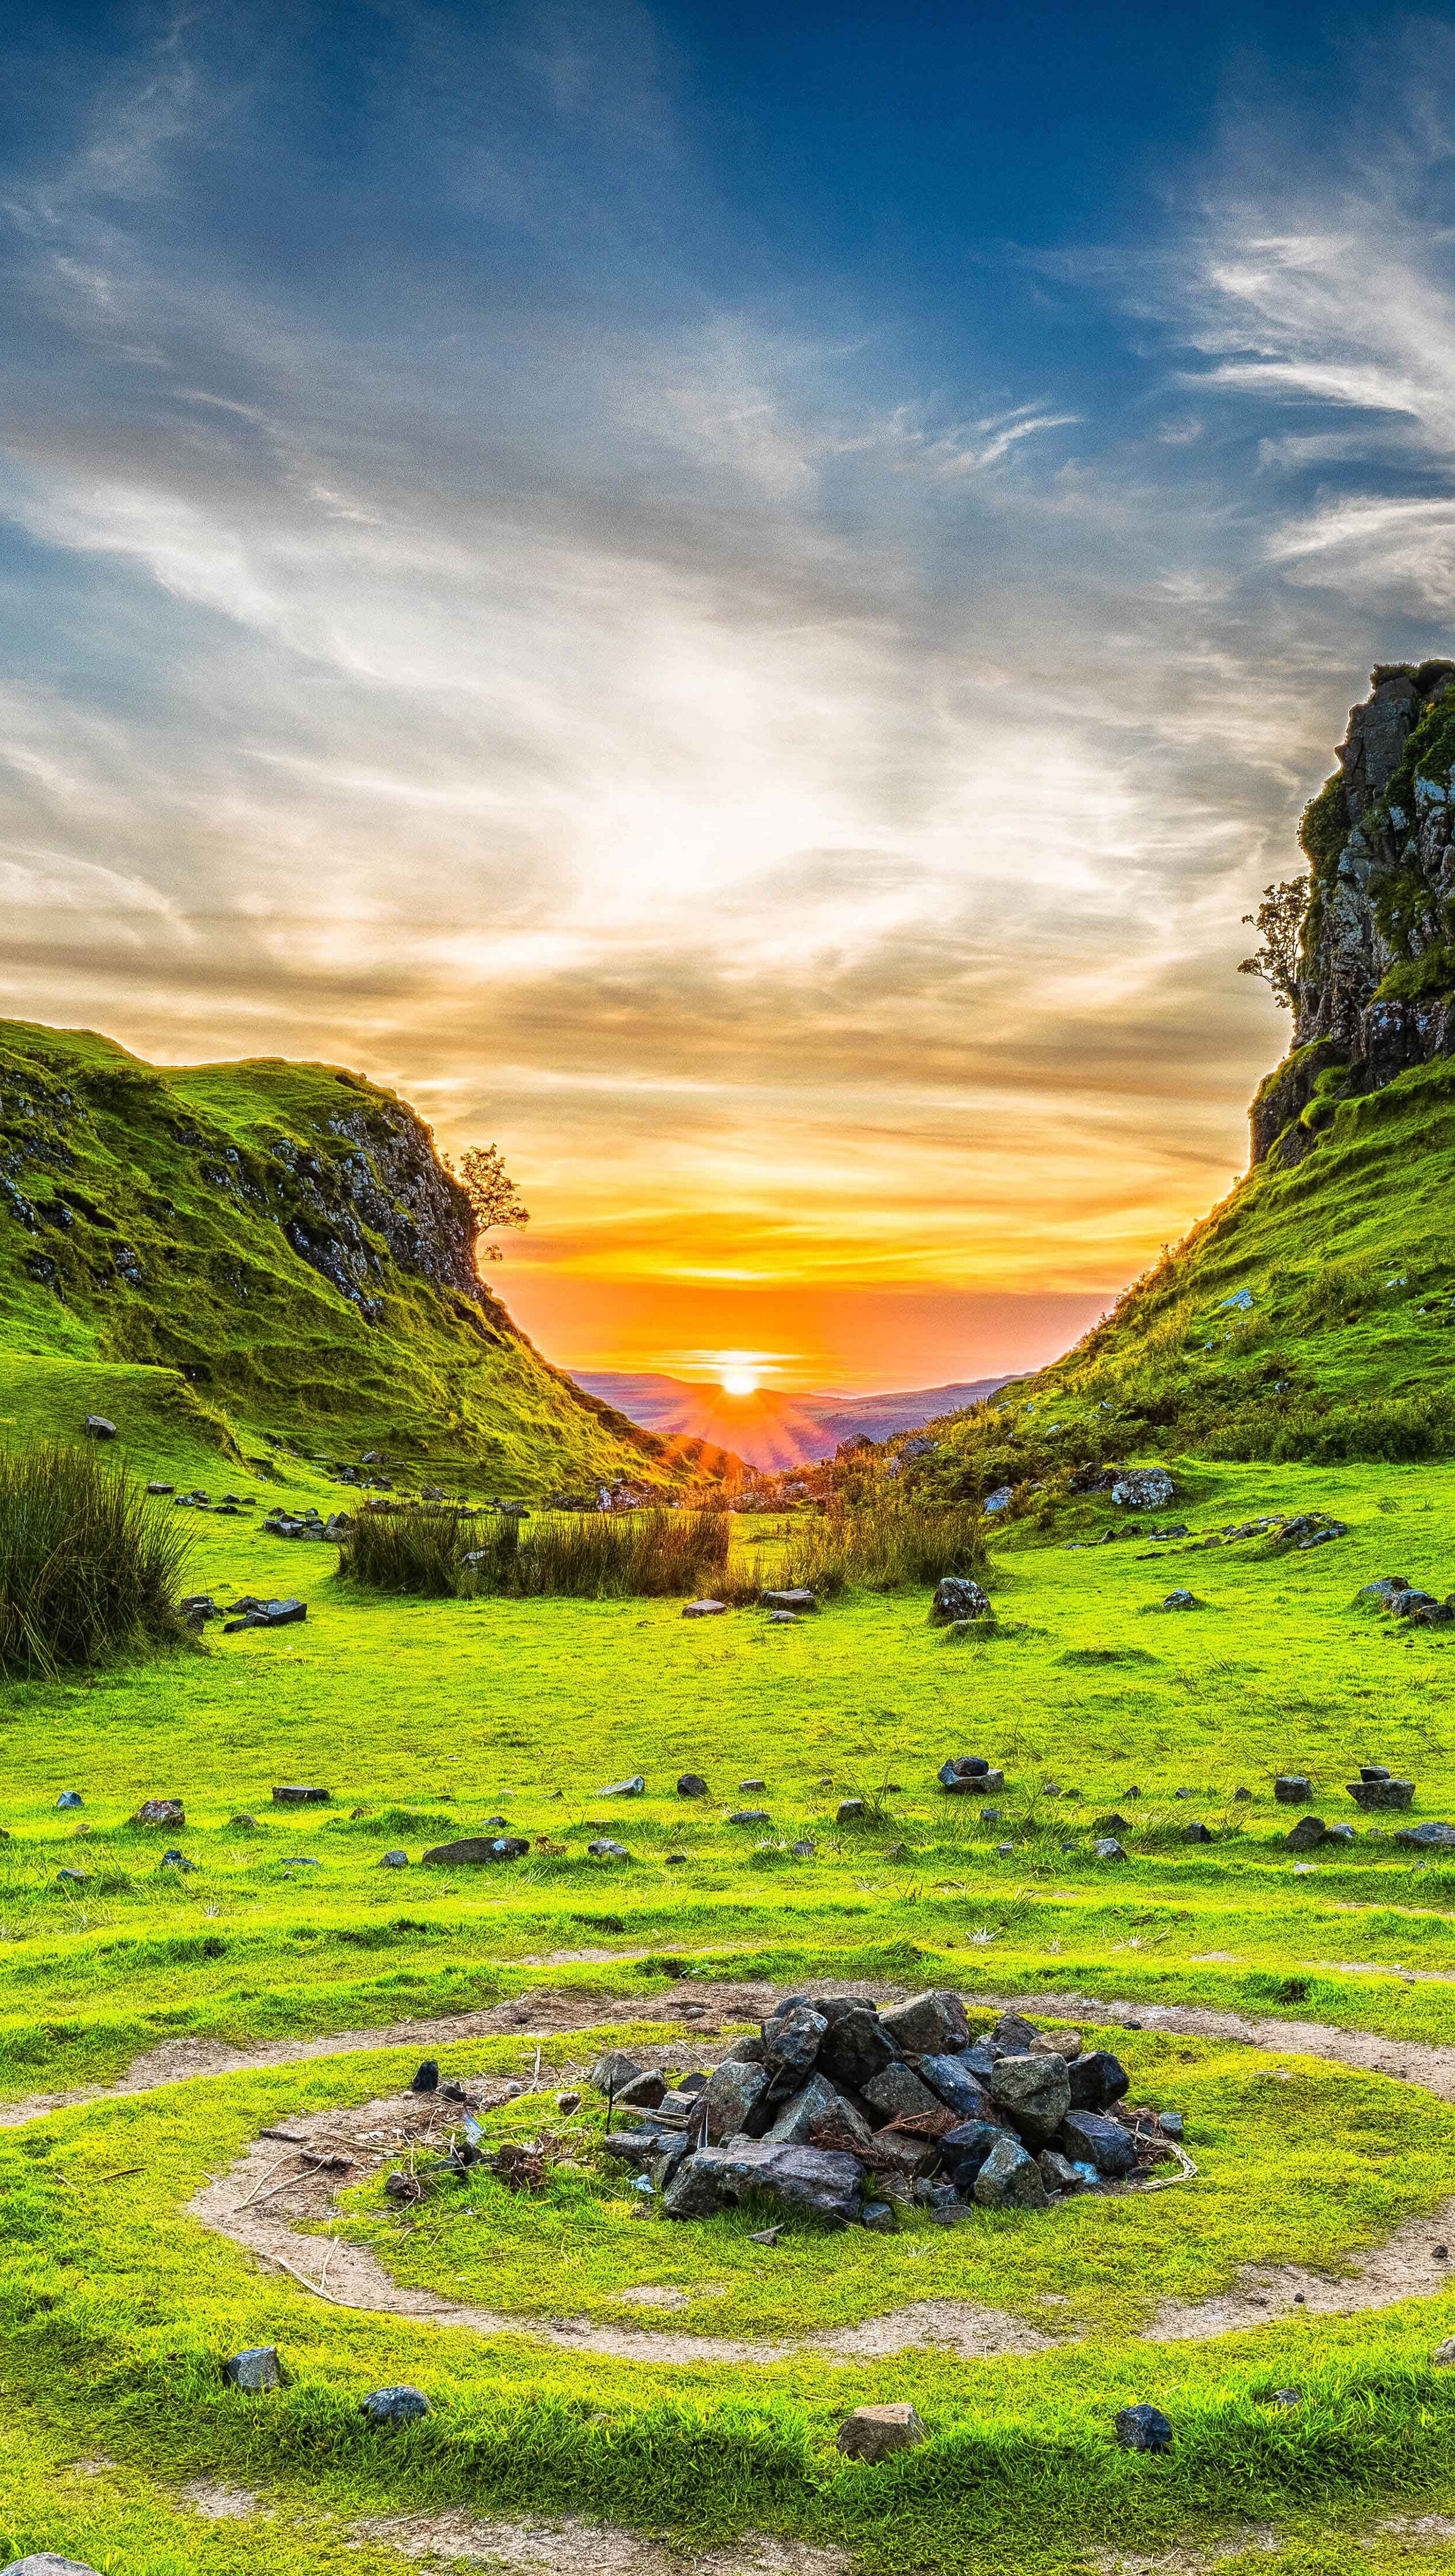 Sunrise in the contryside of the United Kingdom Wallpaper 8k Ultra HD  ID:4585